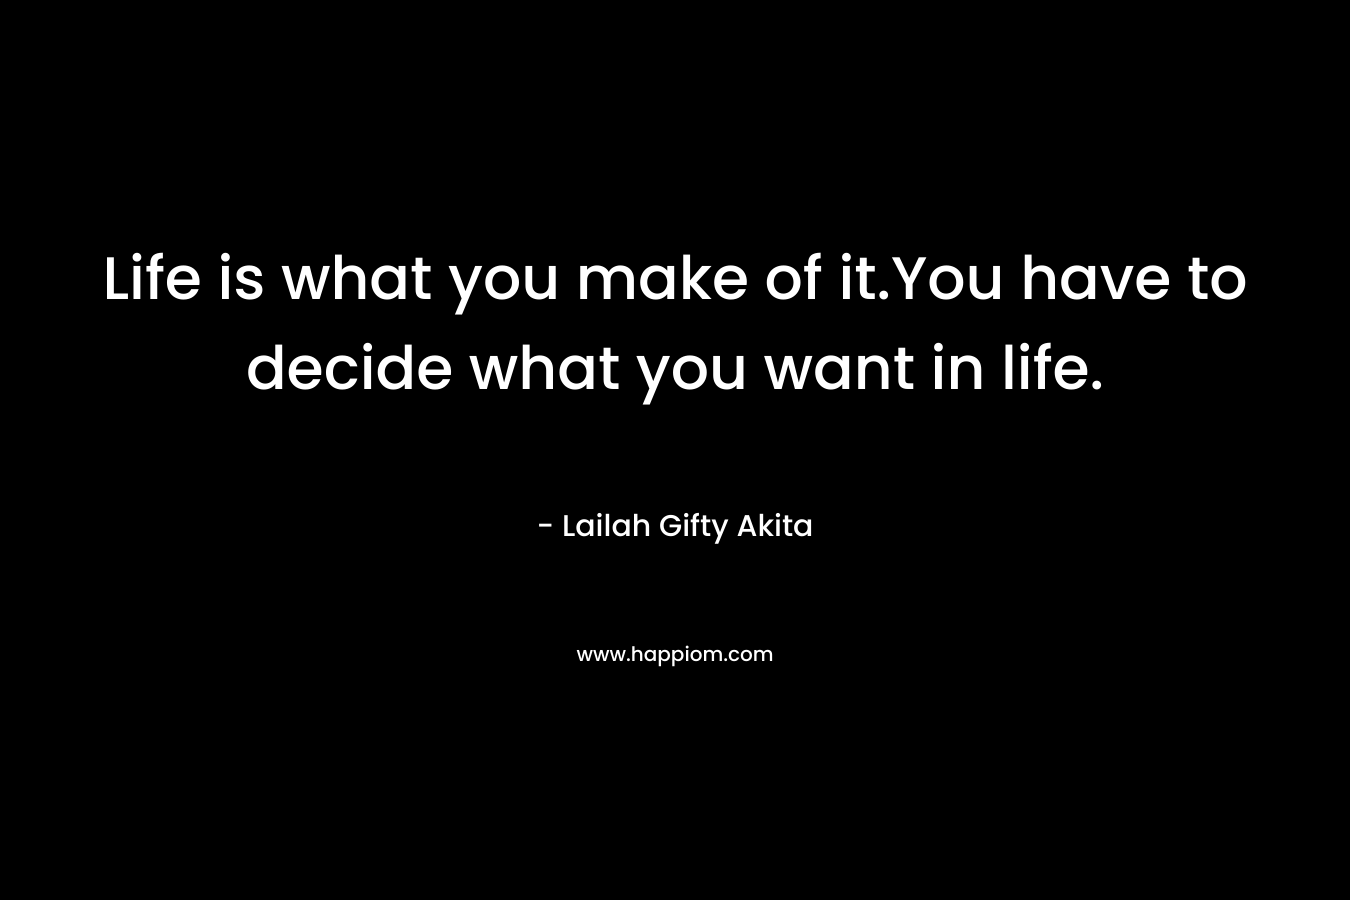 Life is what you make of it.You have to decide what you want in life. – Lailah Gifty Akita